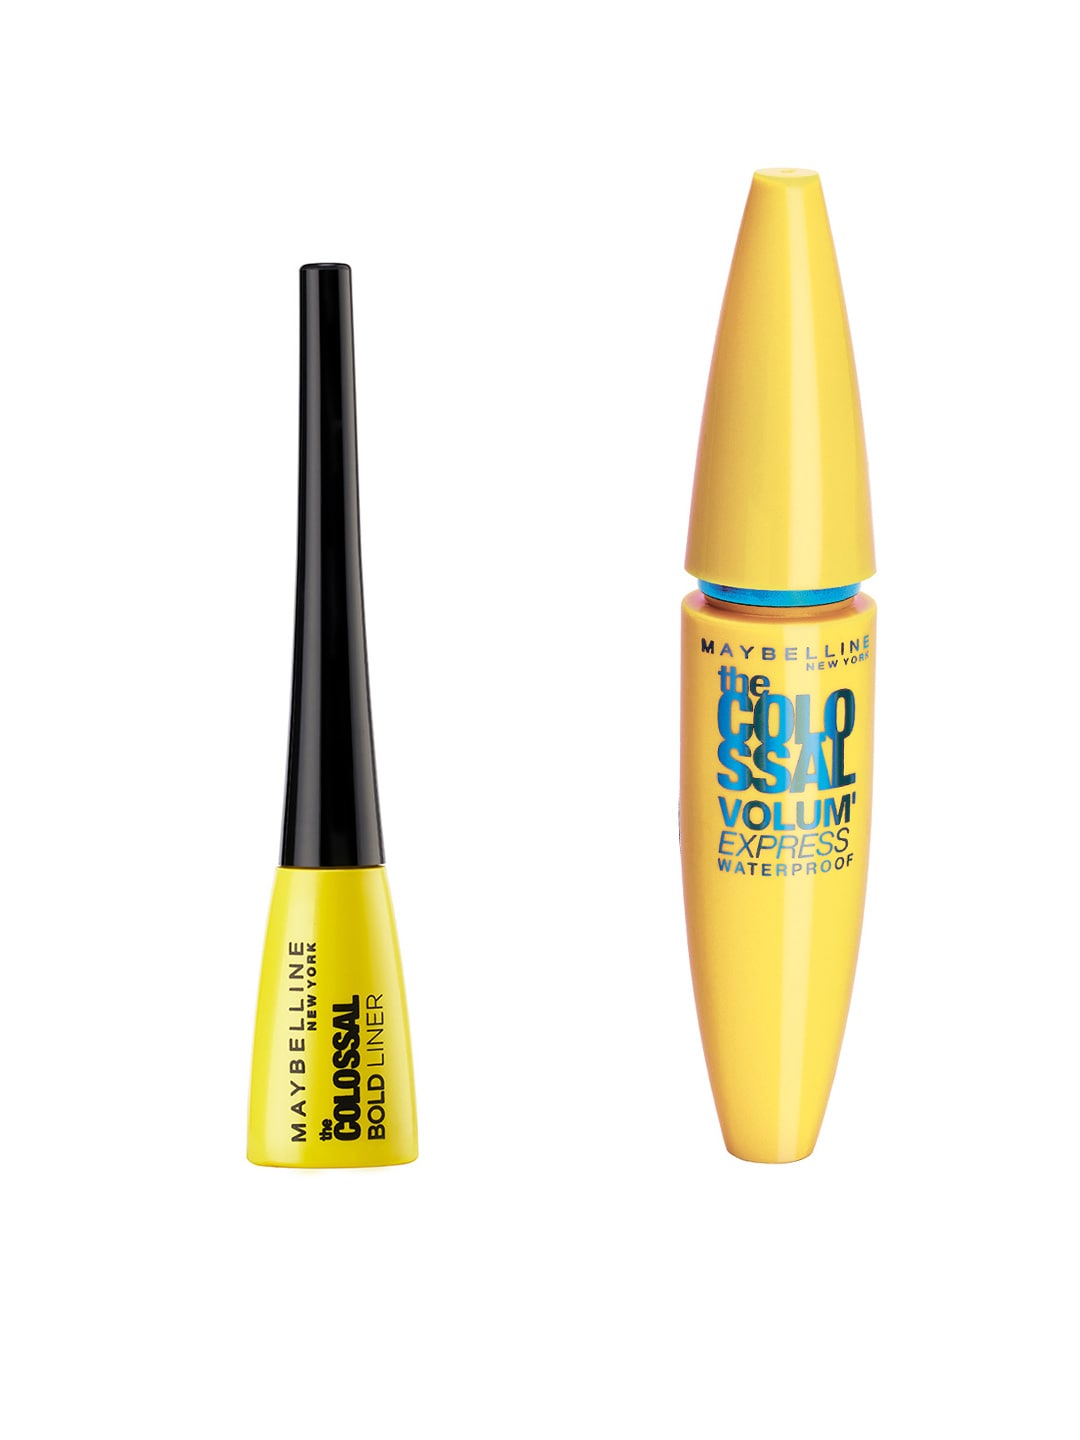 Maybelline Set of Colossal Bold Liner & Colossal Volume Express Waterproof Mascara Price in India